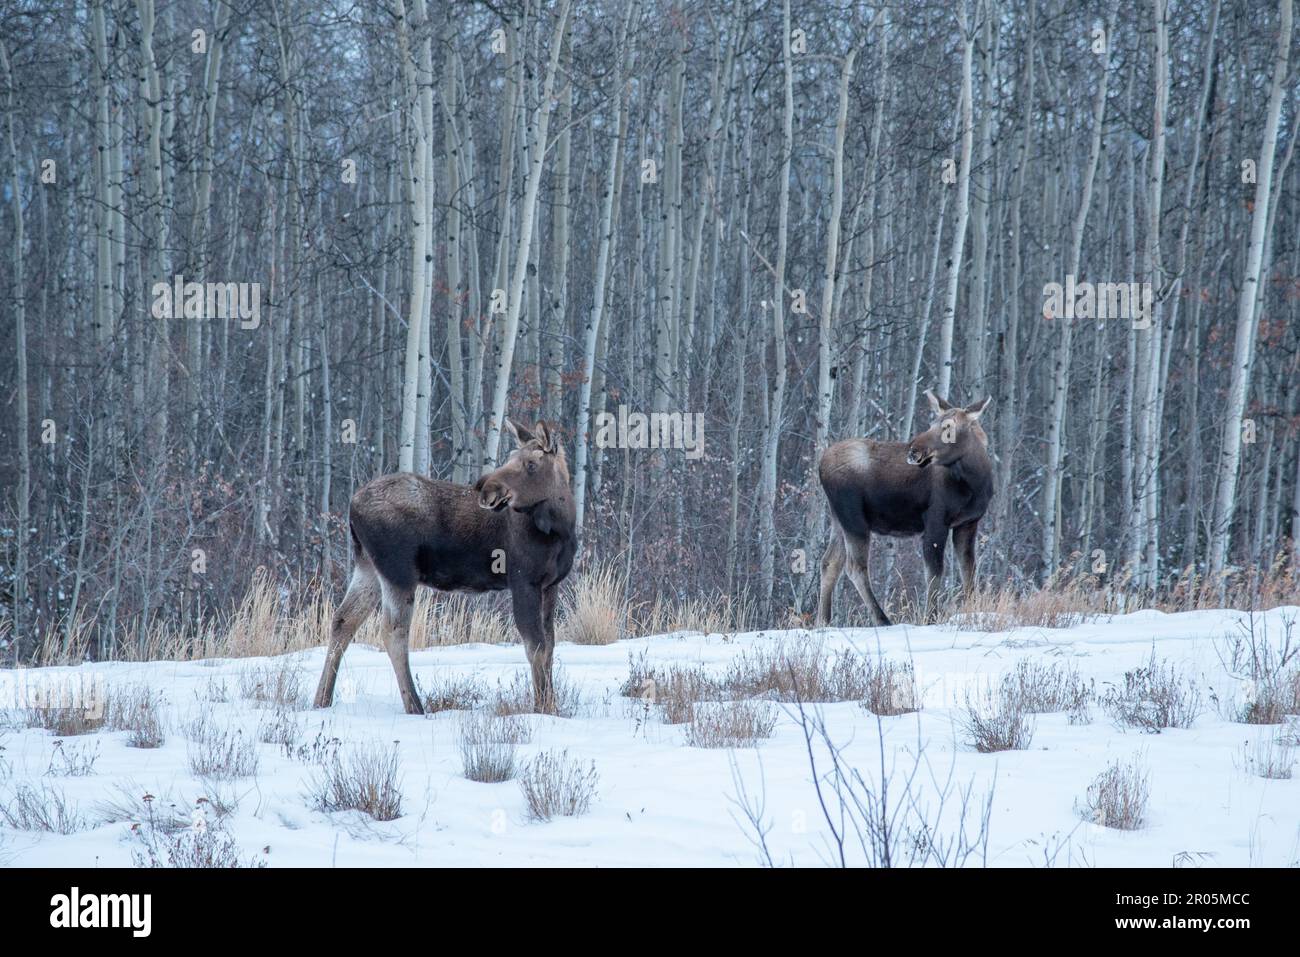 Two curious moose seen on the side of the Alaska Highway in the cold winter. Snowy landscape and boreal forest surrounding the wild animals. Stock Photo